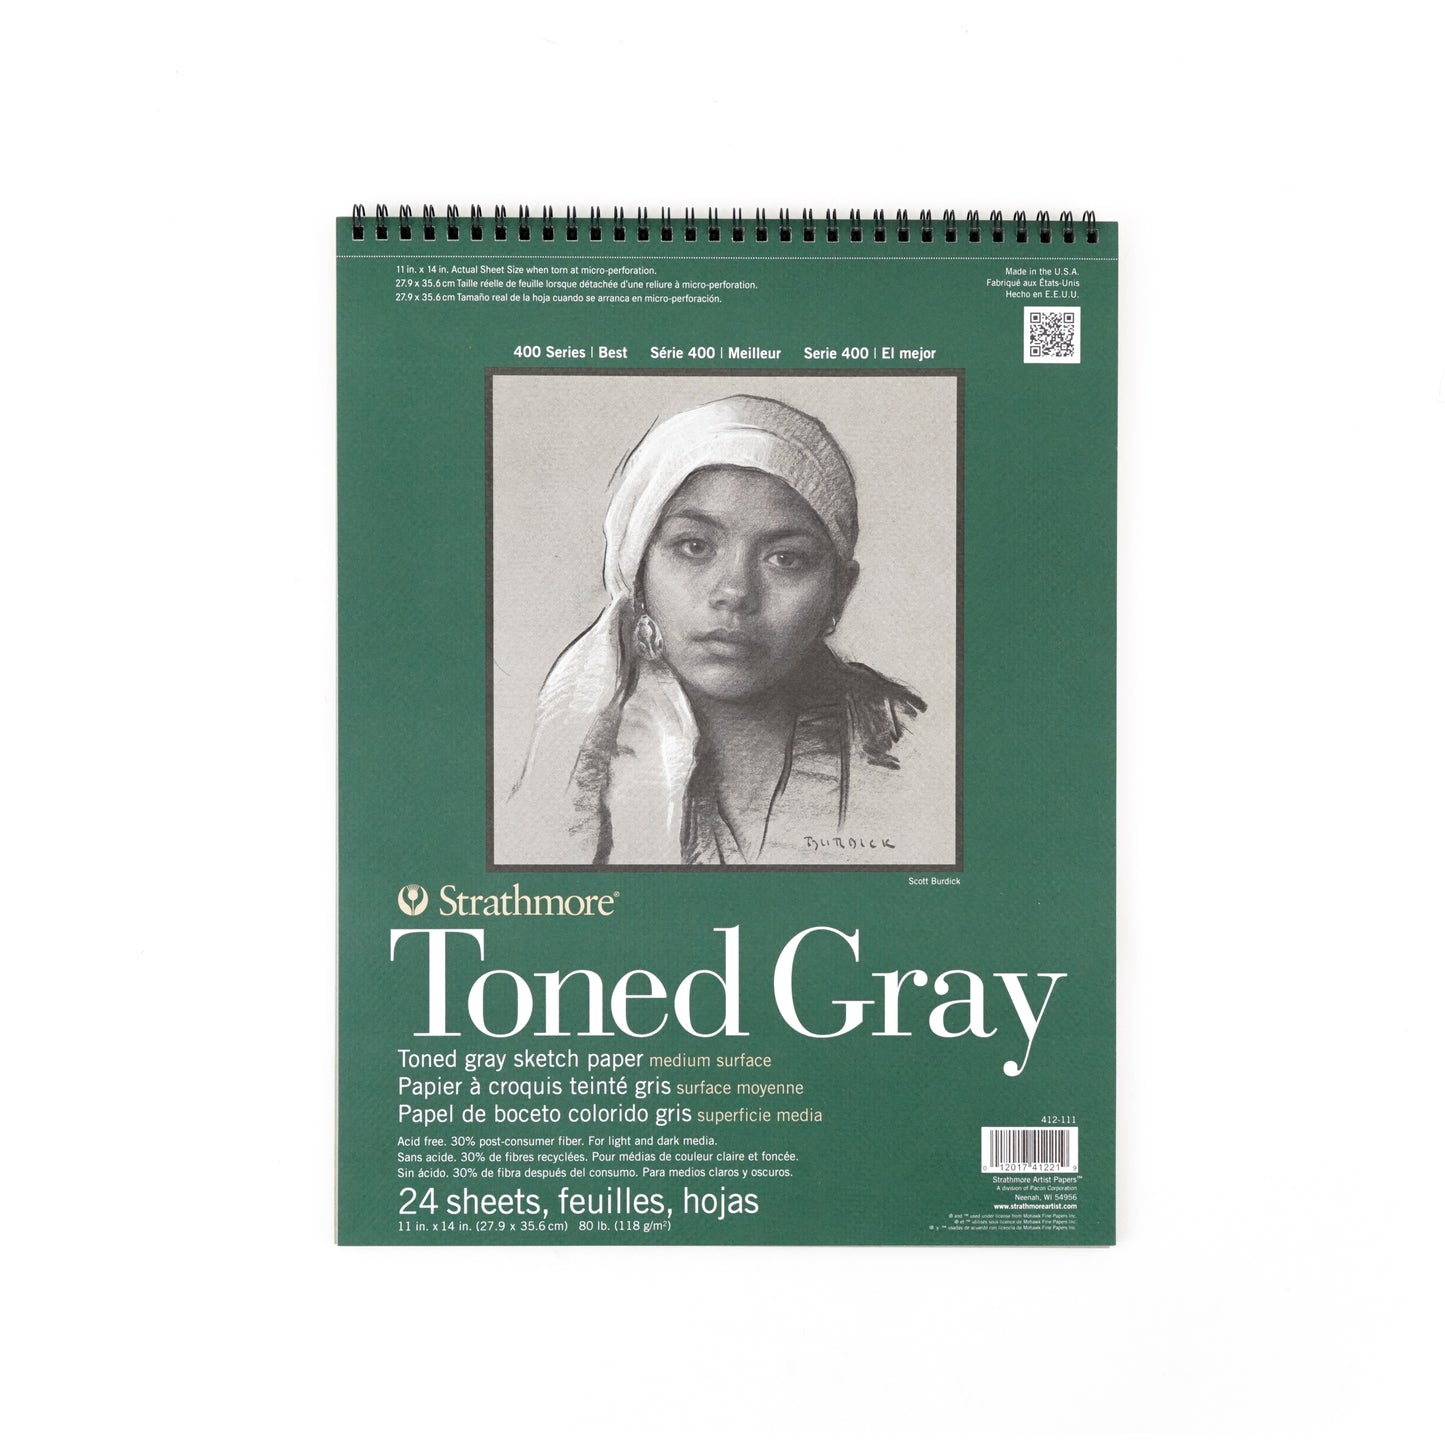 Strathmore Toned Gray Sketch Pad - 400 Series - 11 x 14 inches (24 Sheets) by Strathmore - K. A. Artist Shop